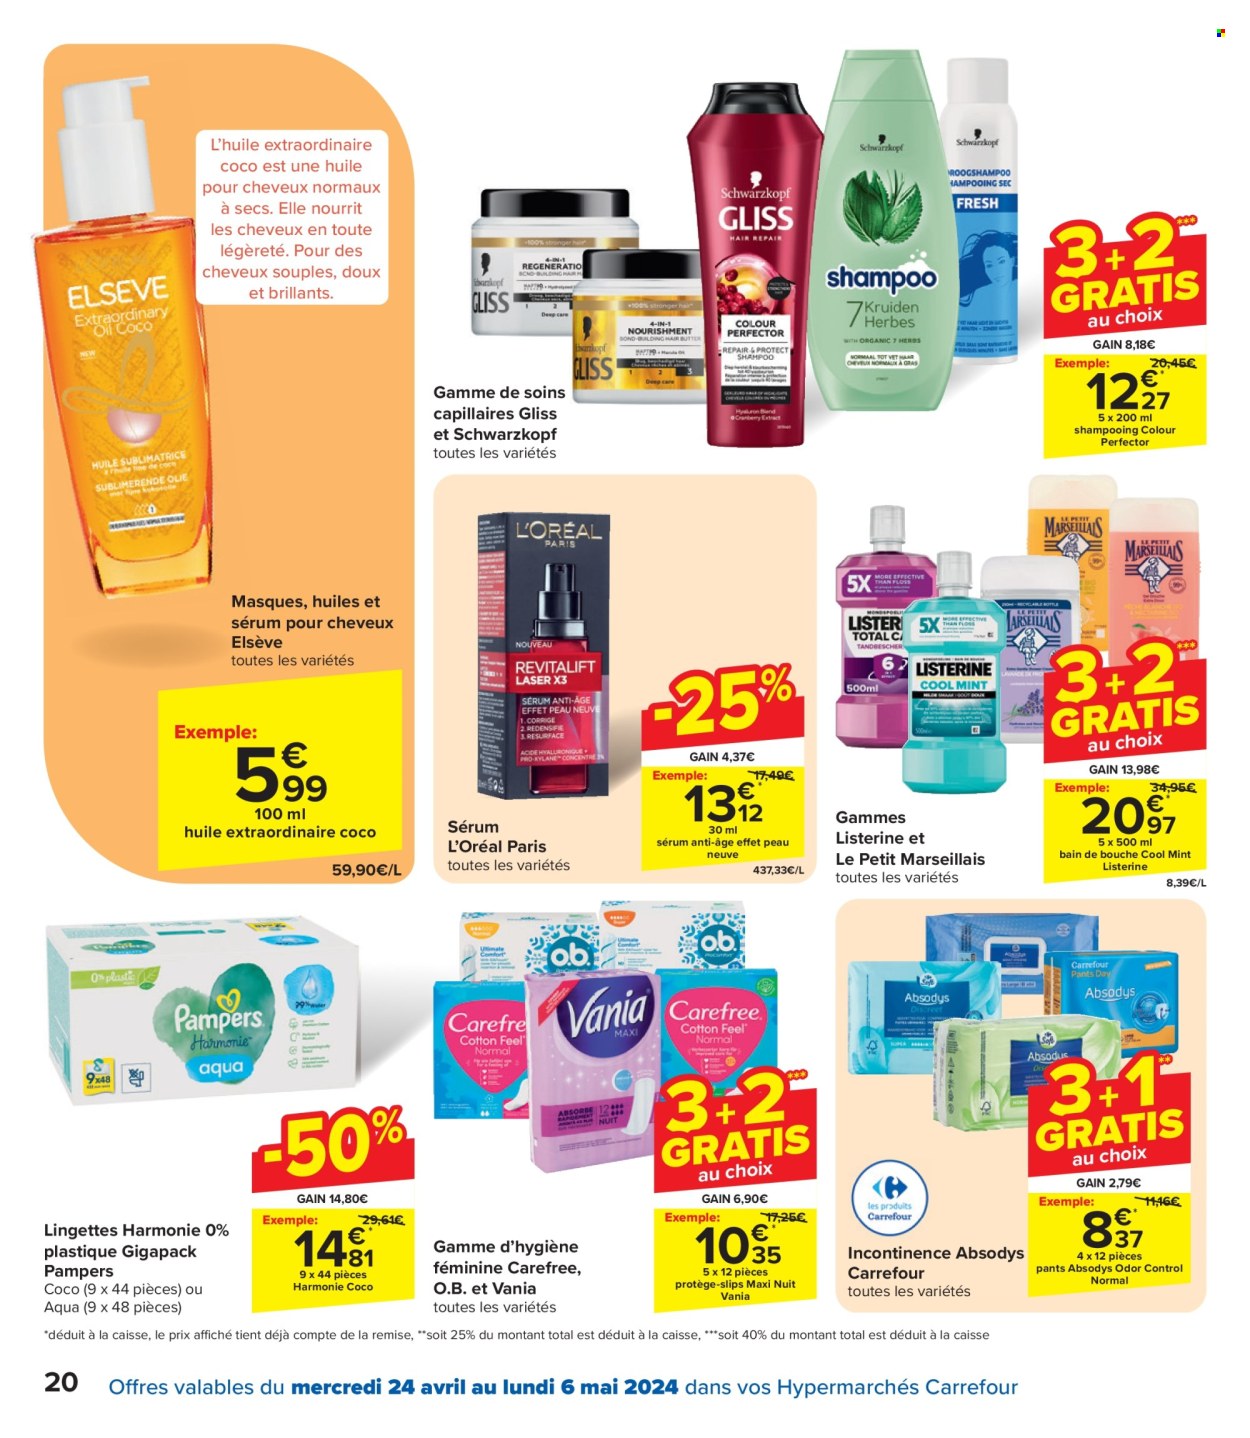 Catalogue Carrefour hypermarkt - 24.4.2024 - 6.5.2024. Page 20.